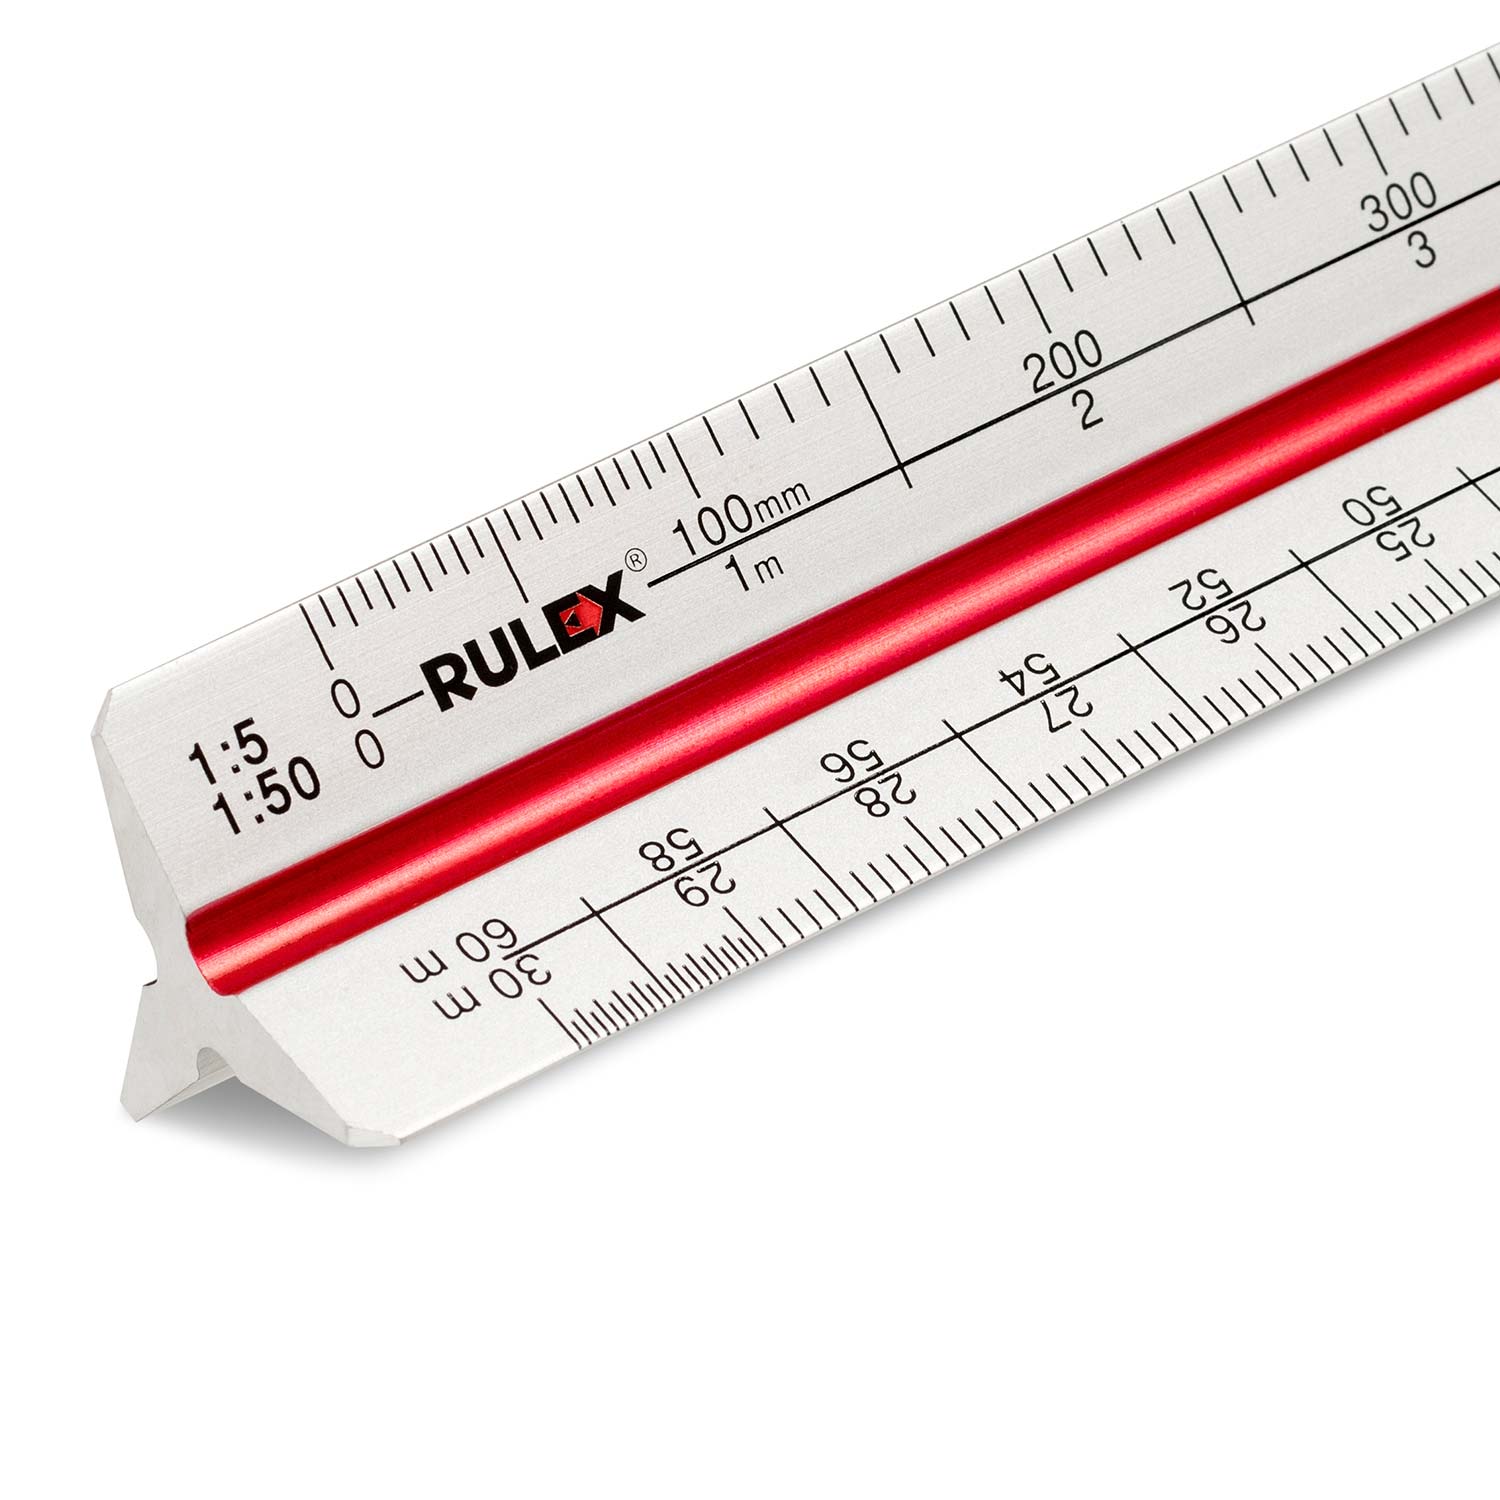 300mm Rulex metal triangular scale ruler - stainless steel